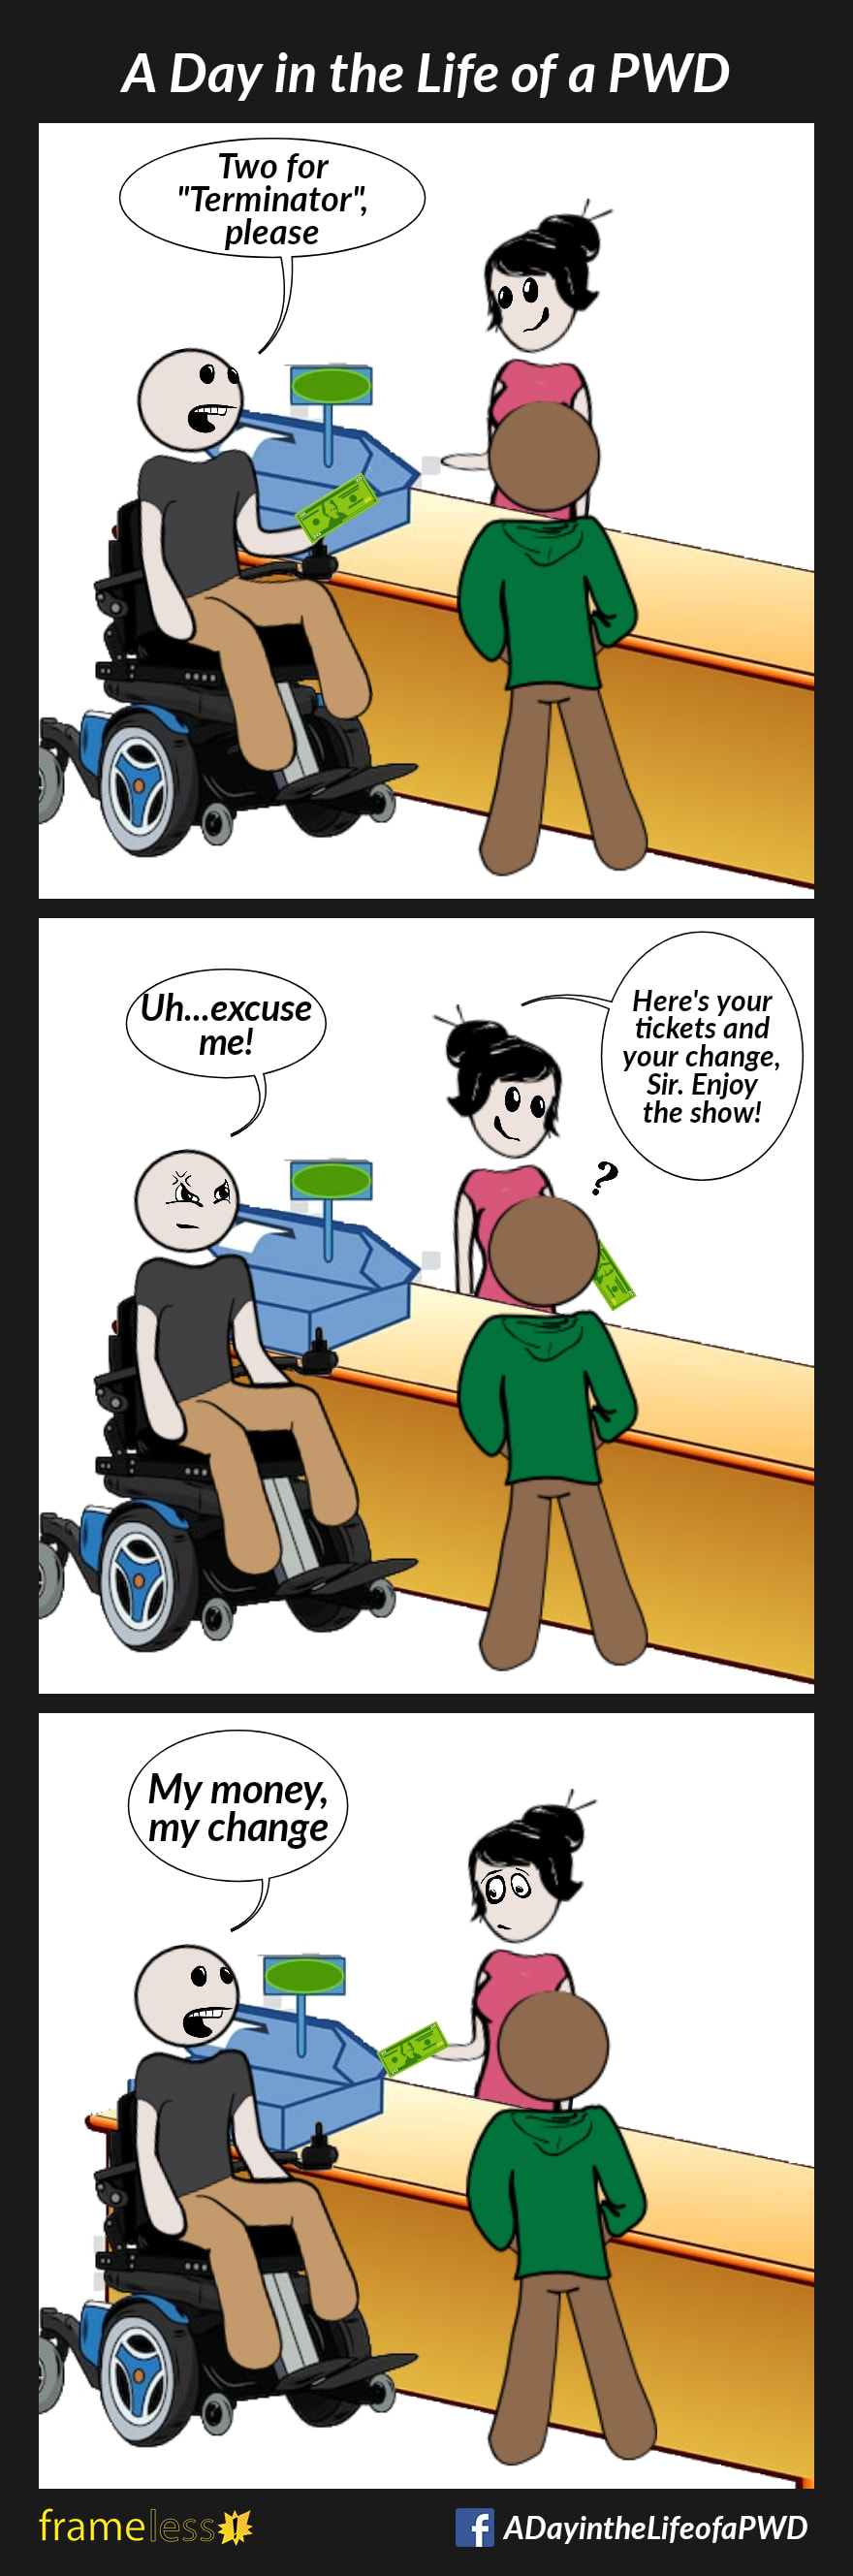 COMIC STRIP 
A Day in the Life of a PWD (Person With a Disability) 

Frame 1:
A man in a wheelchair is buying tickets for himself and a friend. He hands money to the cashier.
MAN: Two tickets for 